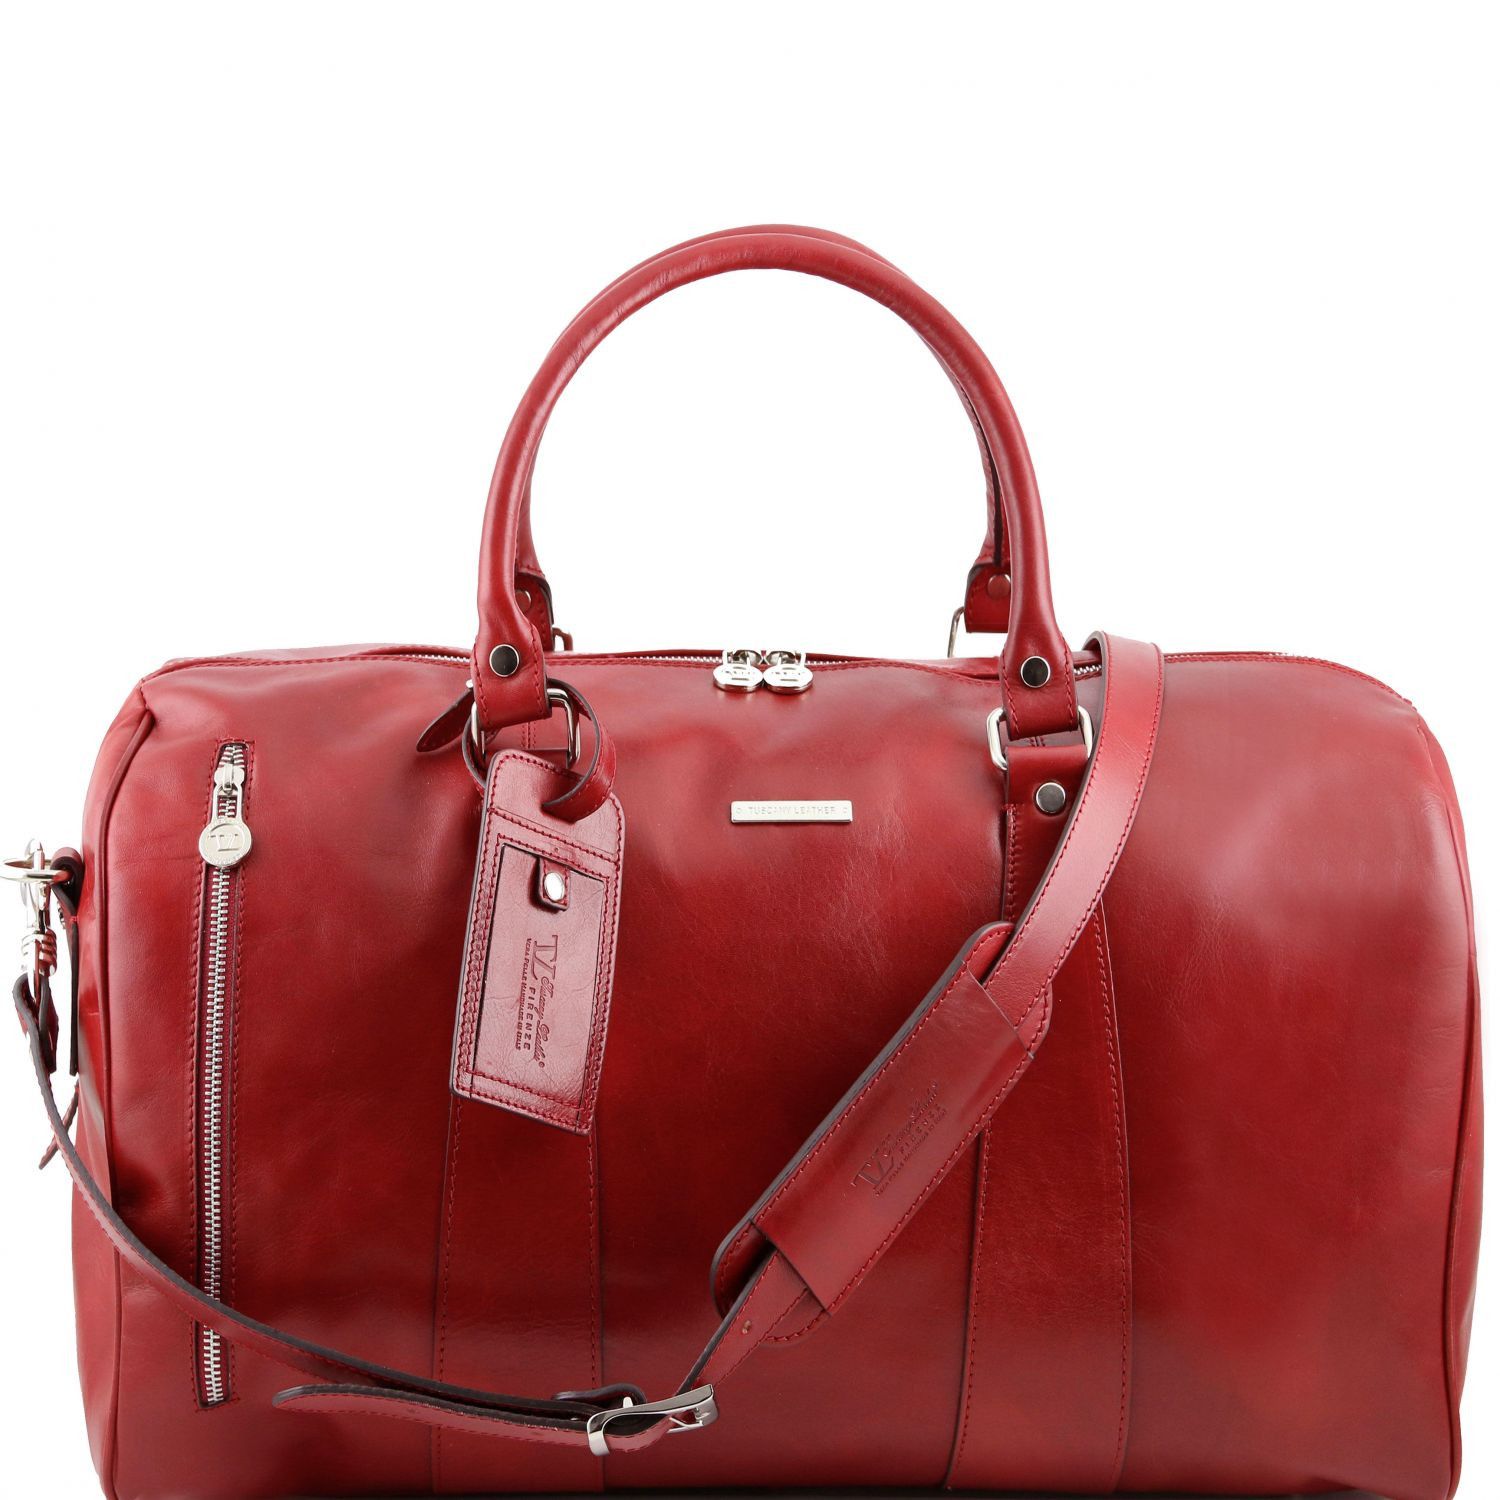 TL Voyager Travel Leather Duffle bag Small Size Red TL141216